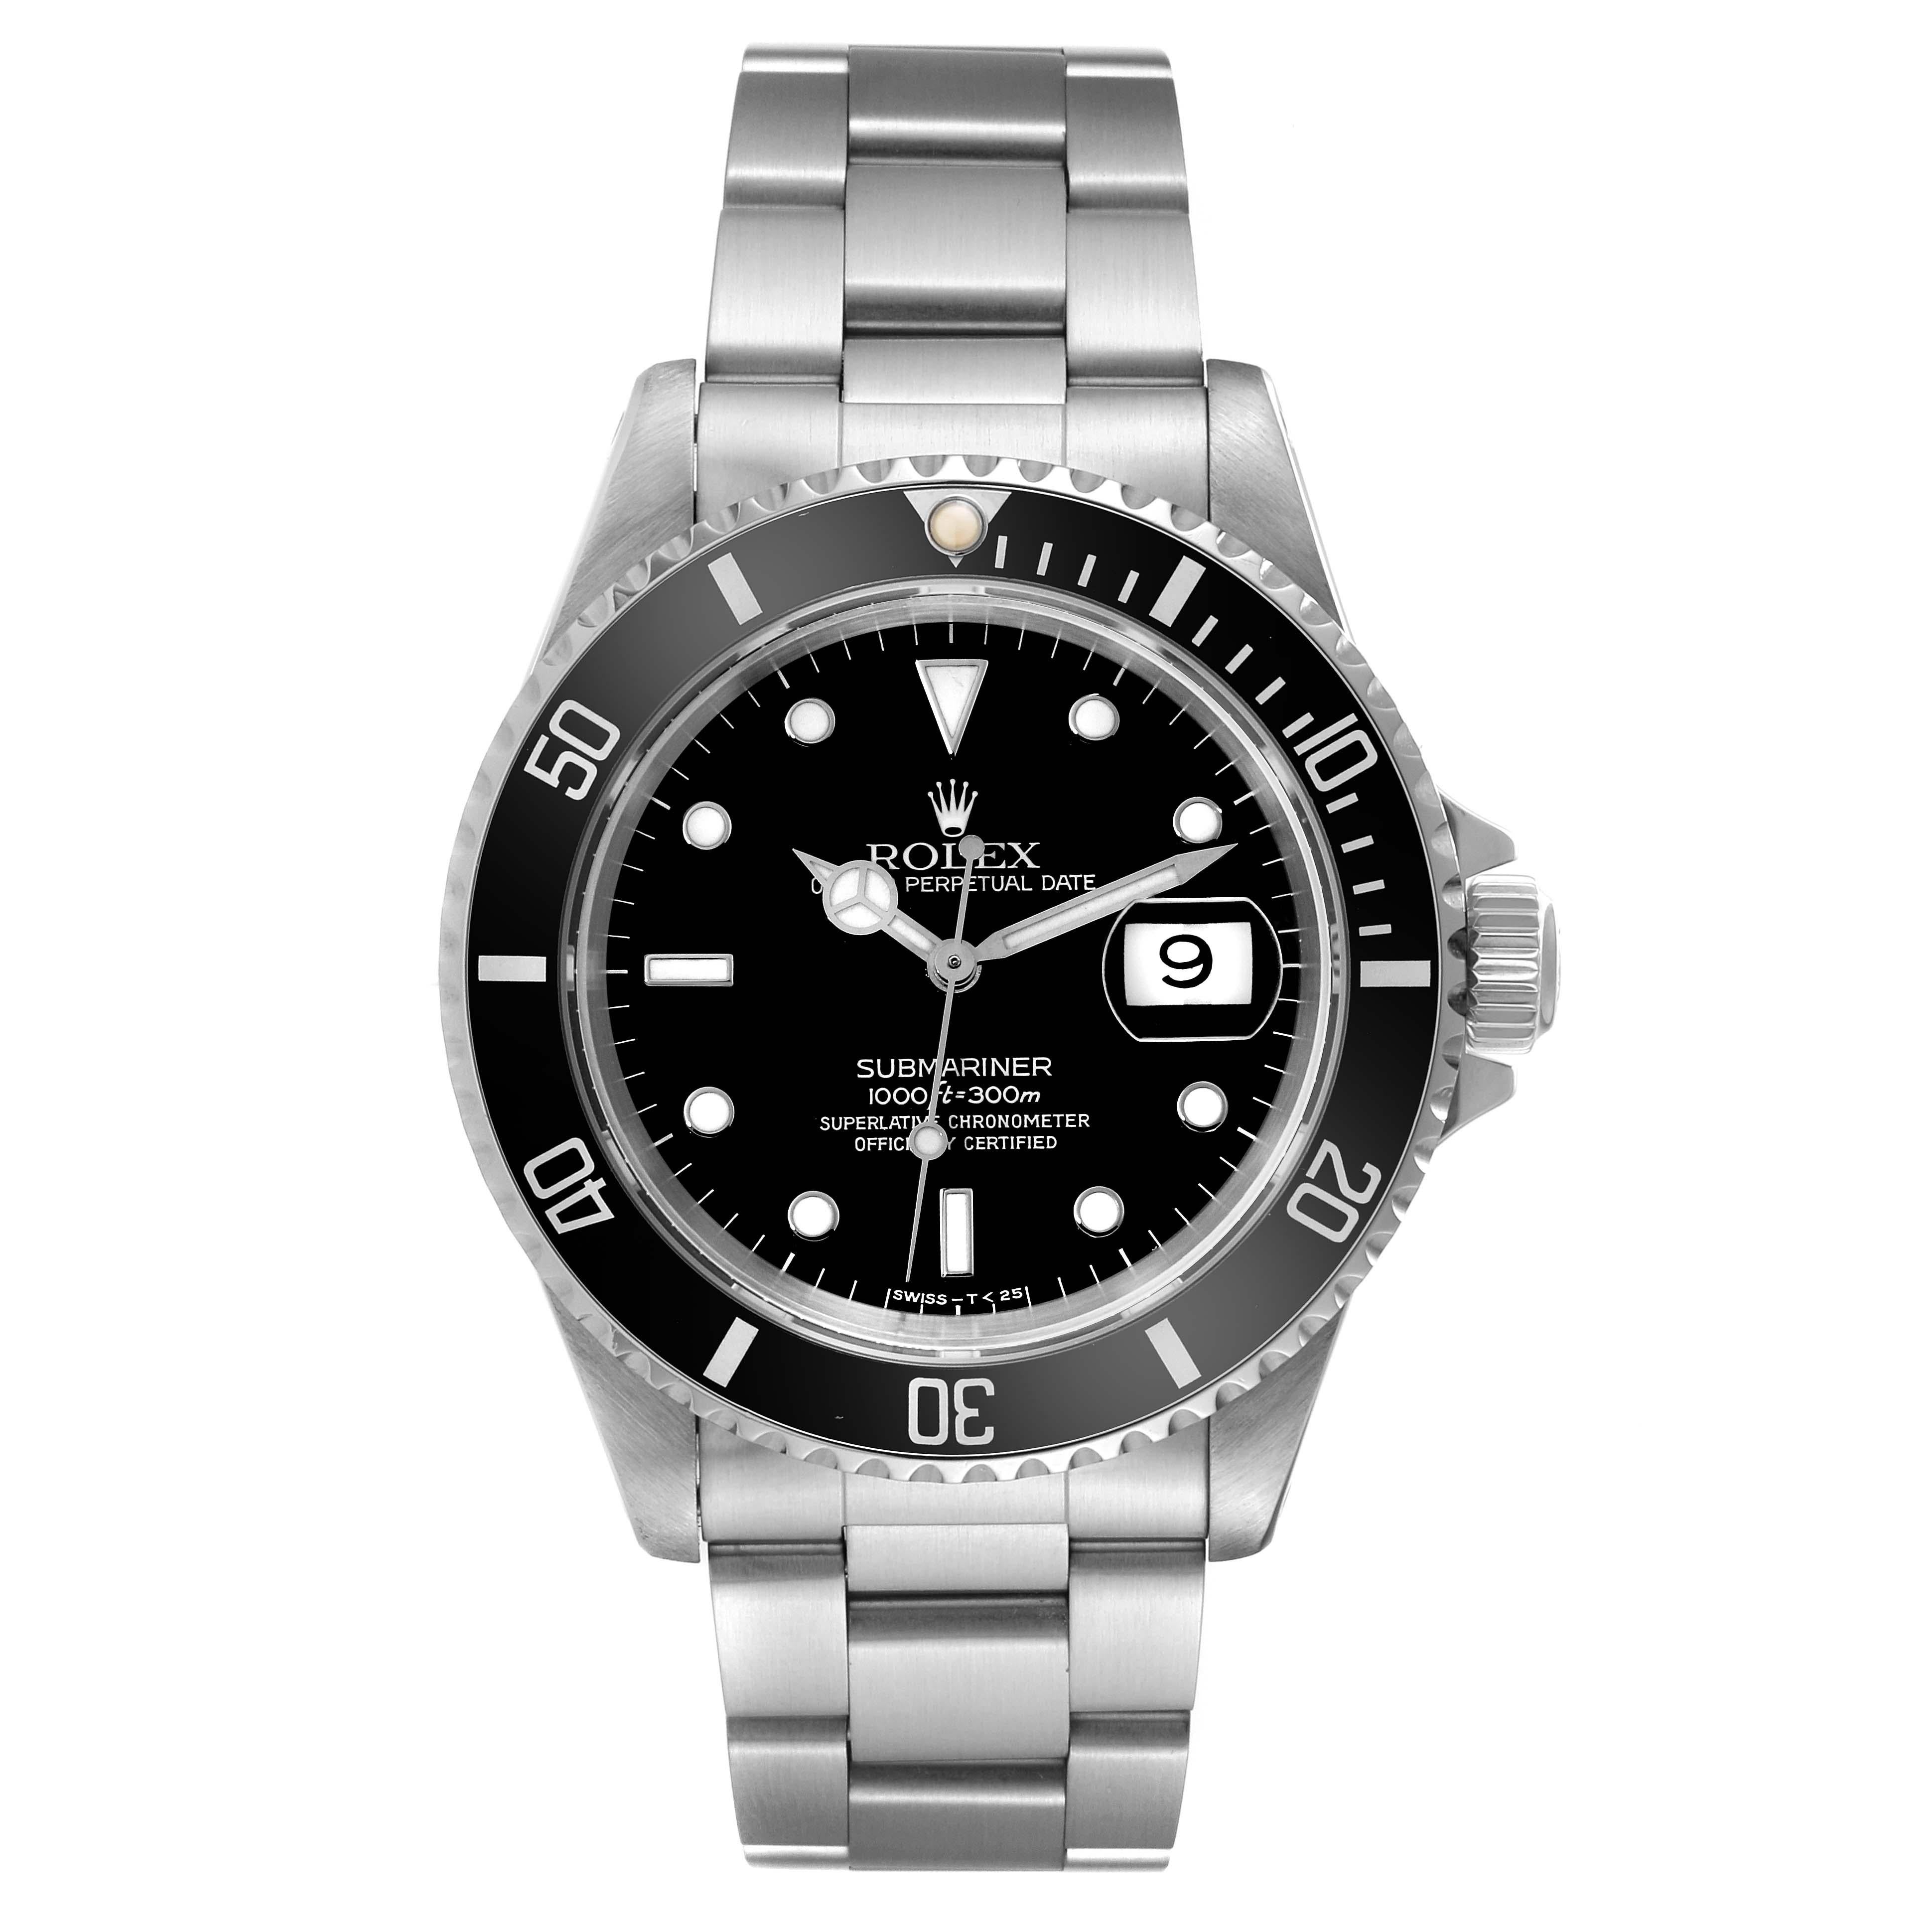 Rolex Submariner Date Black Frosted Dial Steel Mens Watch 16610 Box Papers en vente 7